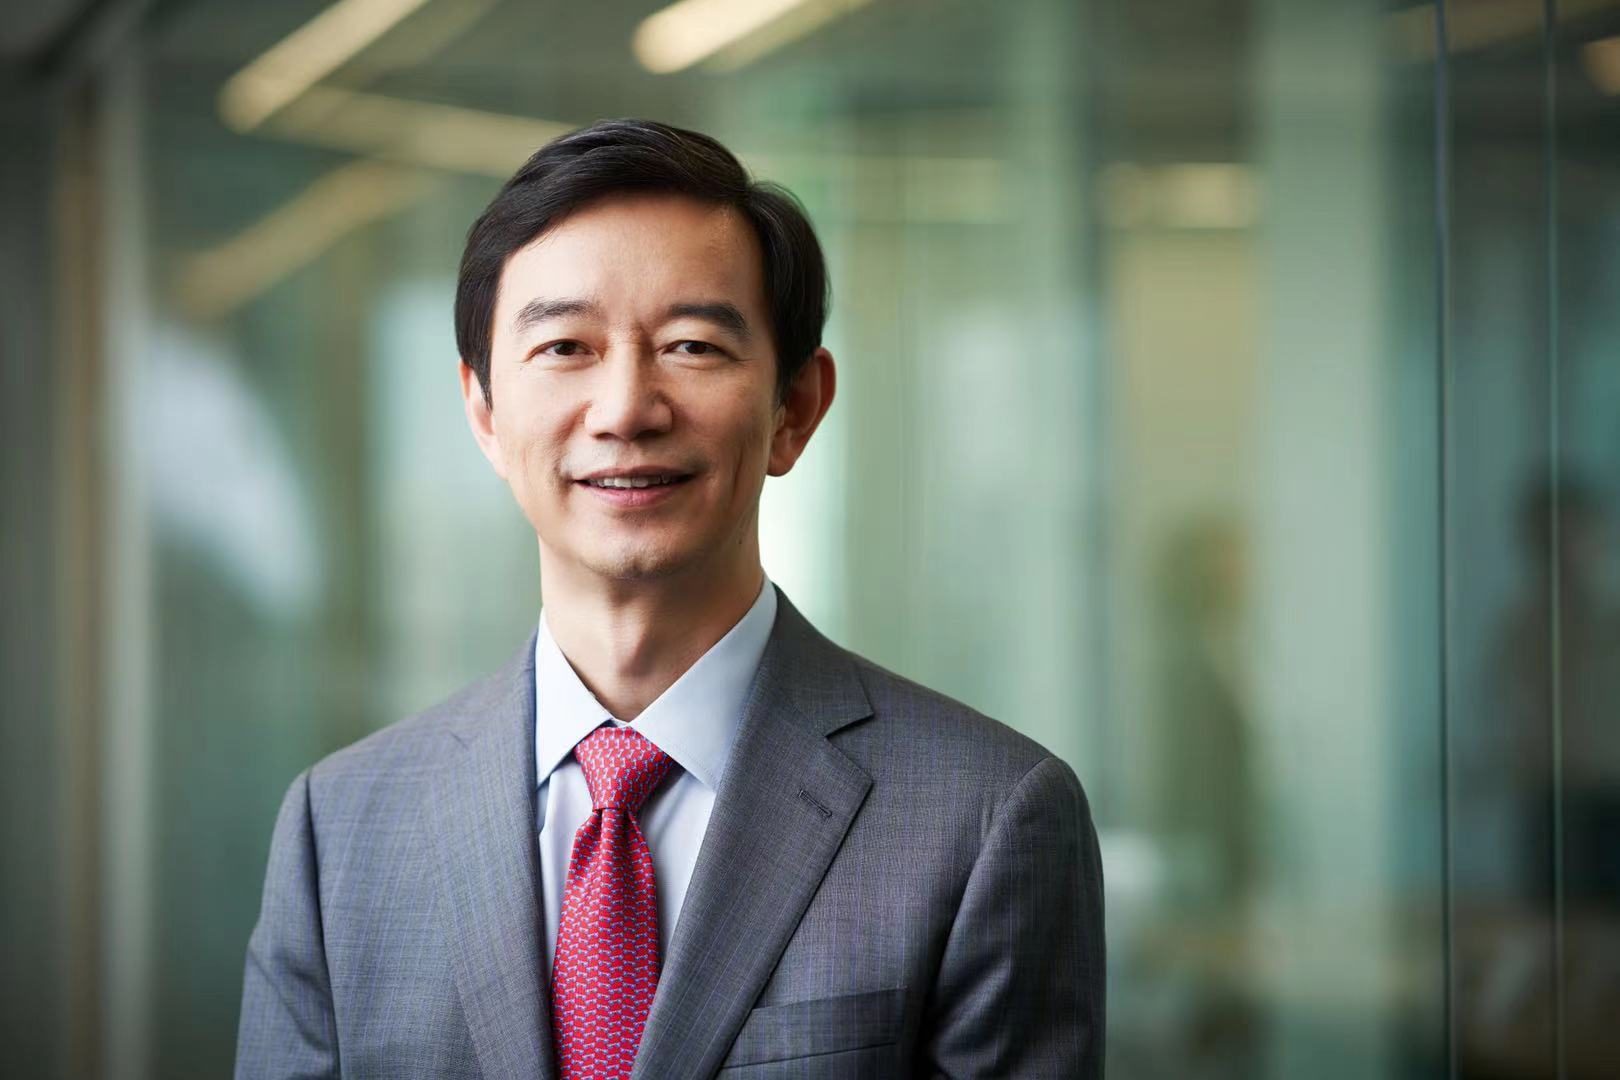 LPs now view China as 'biggest venture market' outside US: James Mi, Lightspeed China